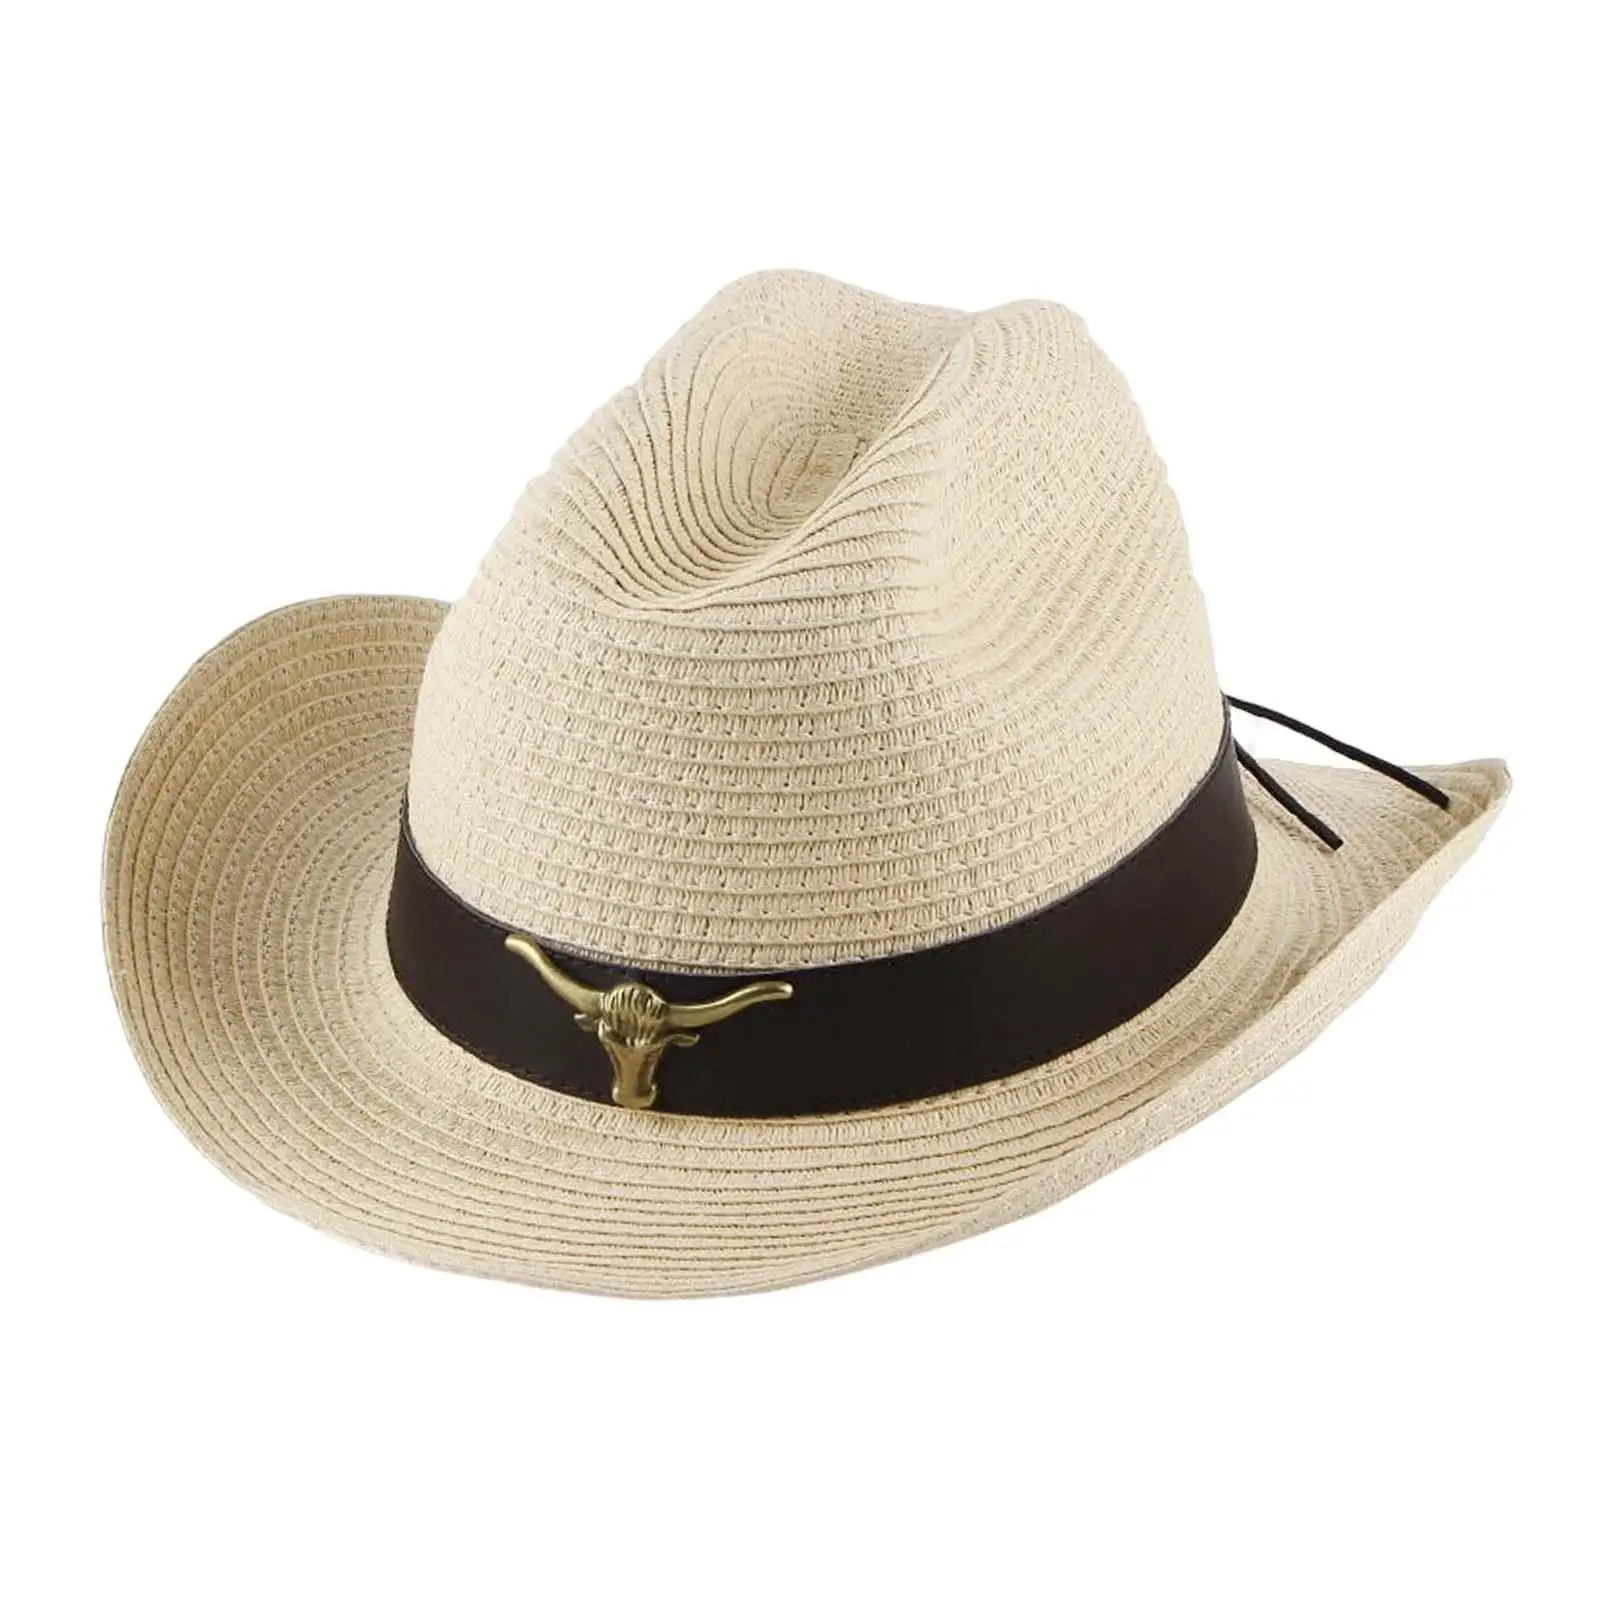 Classic Western Cowboy Hat Wide Brimmed Sunshade Hat Unisex Straw Cow Decorate for Outdoor Leisure Summer Cowgirl Teens Men